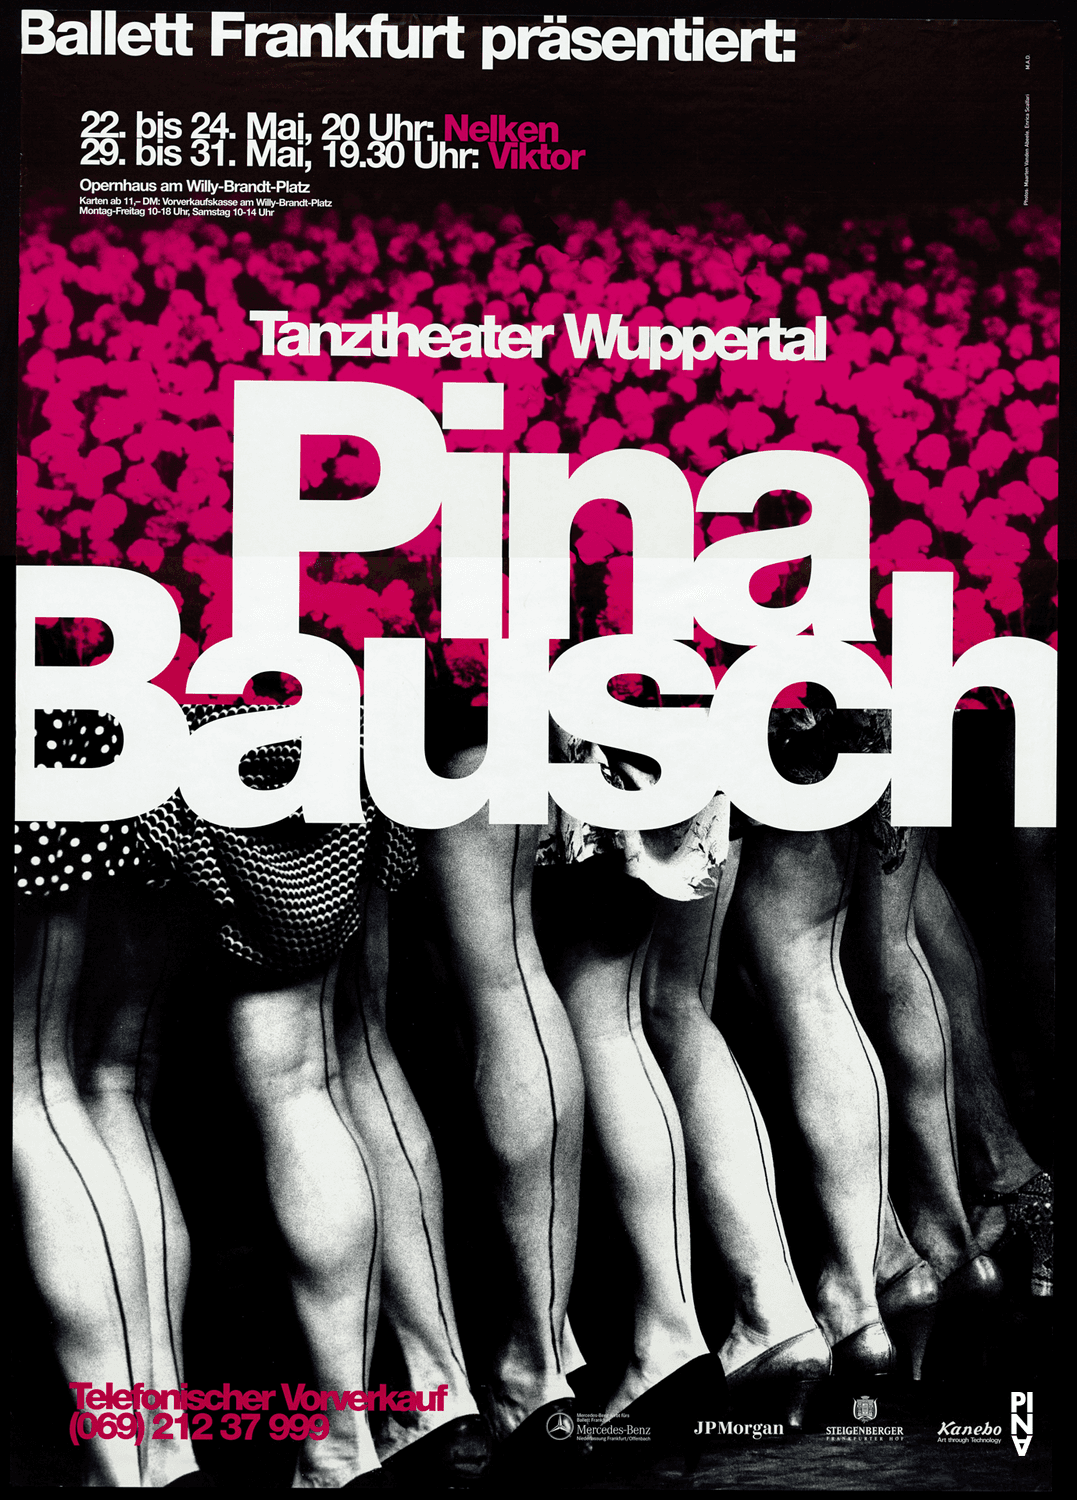 Poster for “Nelken (Carnations)” and “Viktor” by Pina Bausch in Frankfurt am Main, 05/22/1997 – 05/31/1997